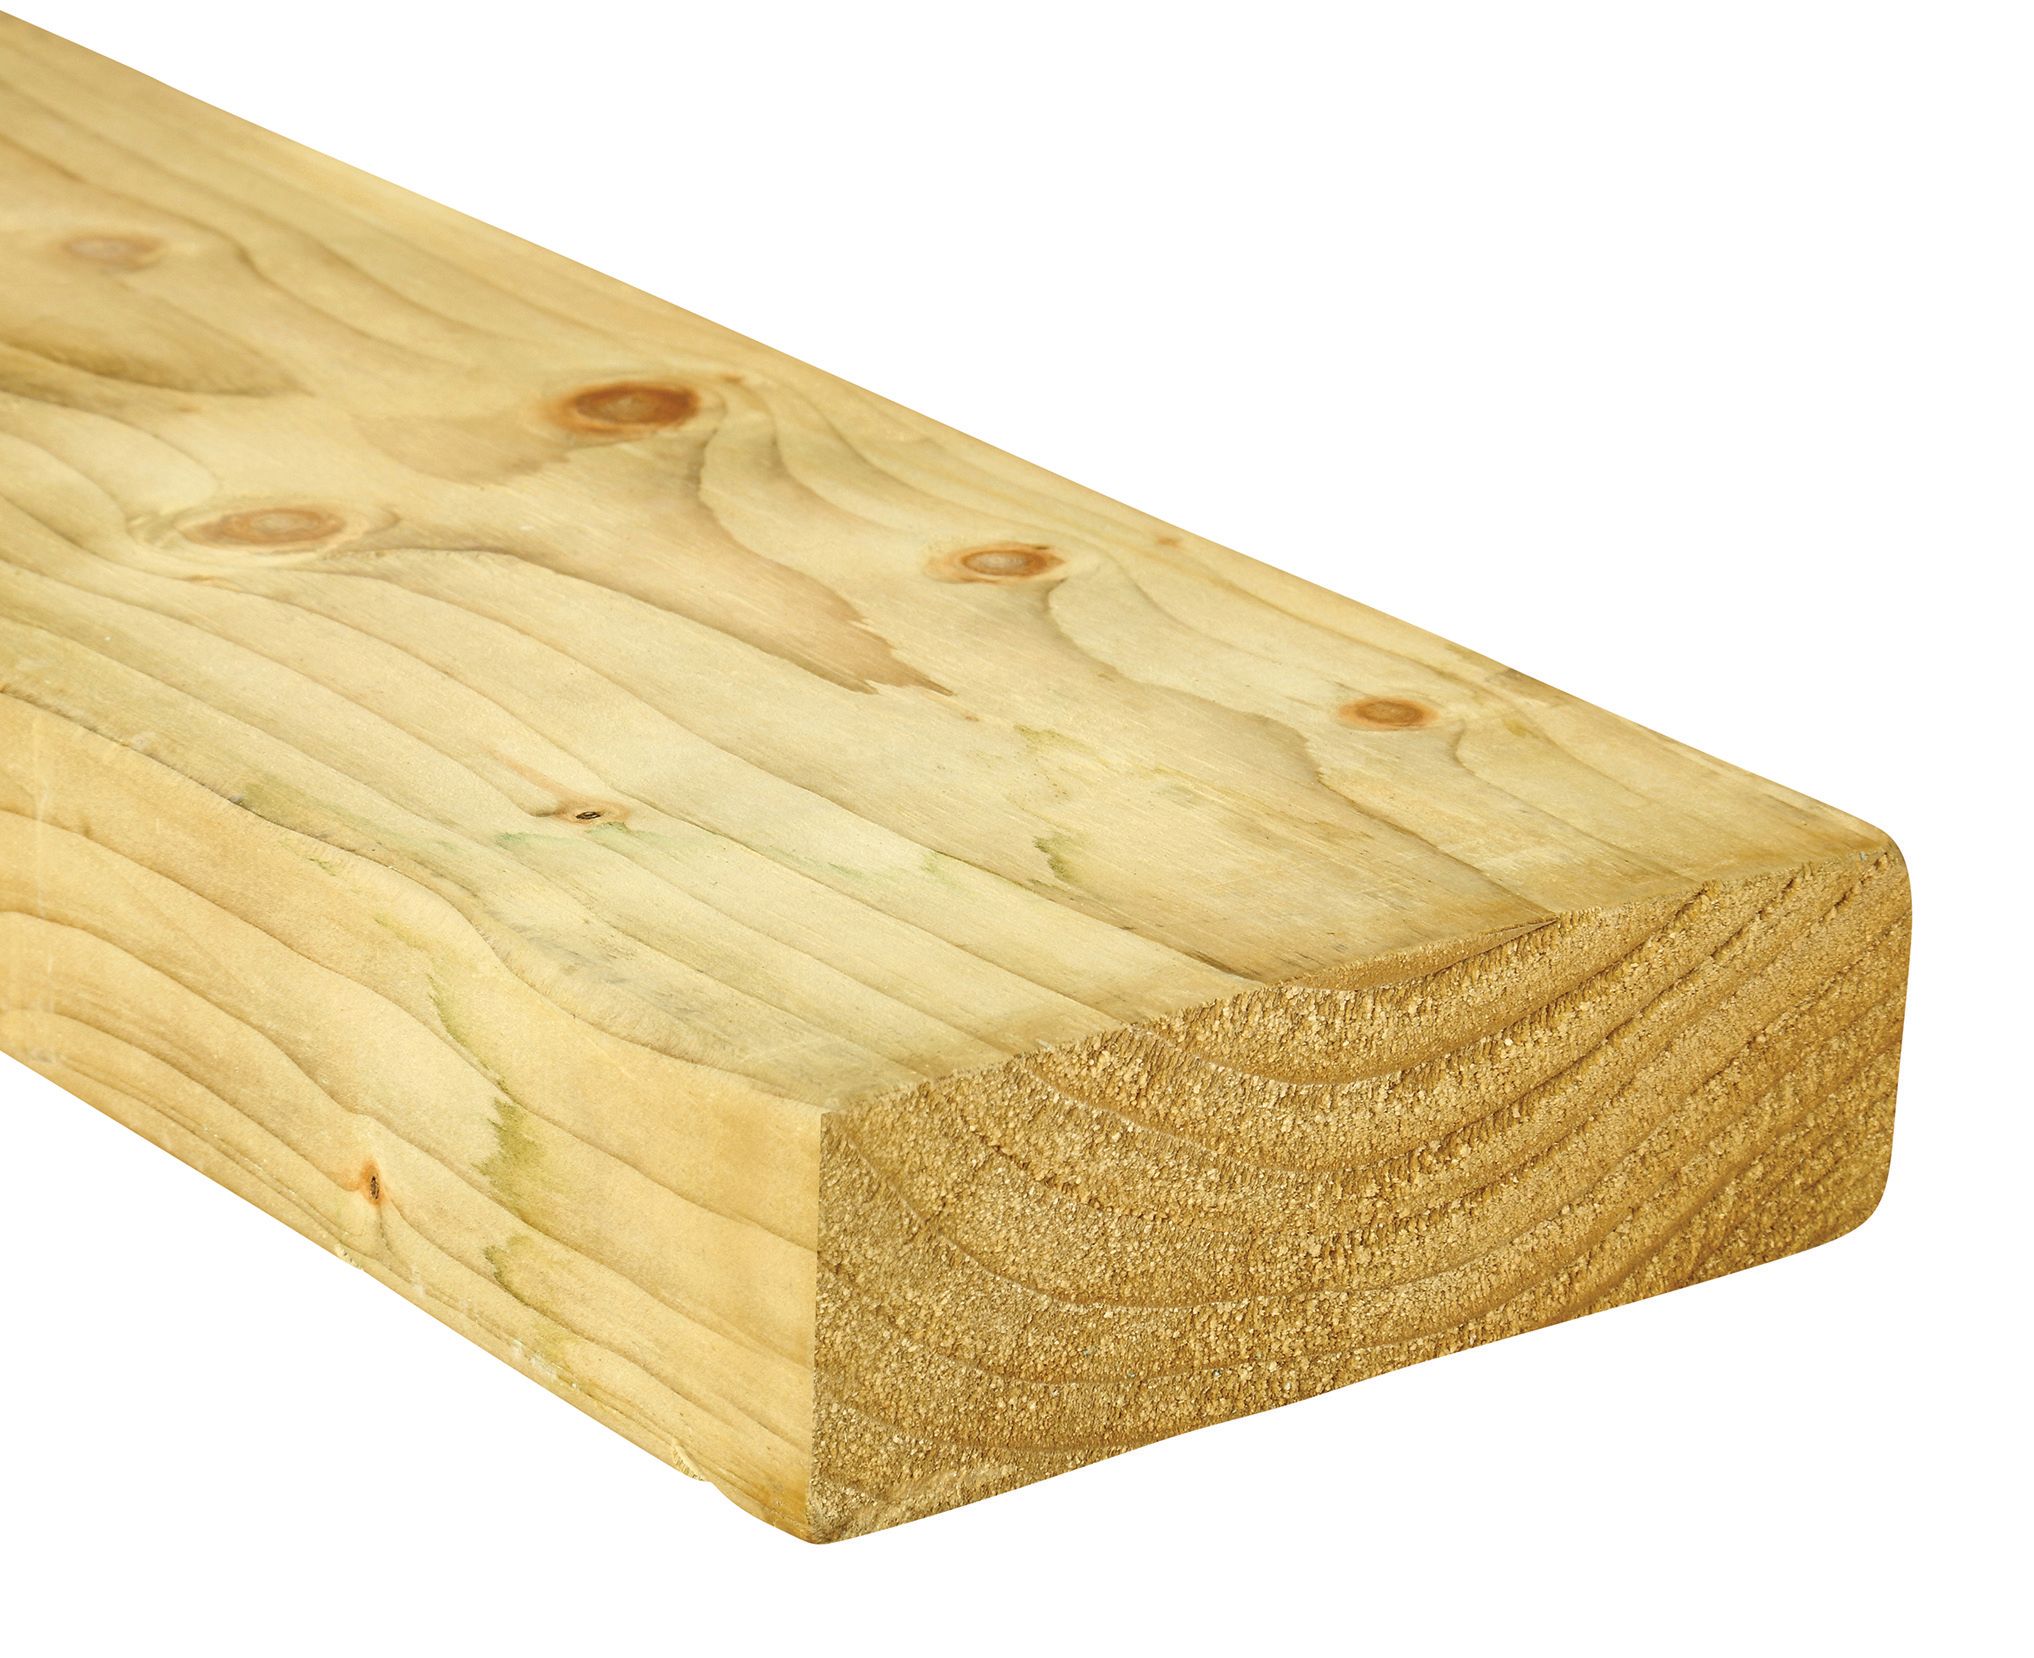 Image of Wickes Treated Kiln Dried C24 Regularised Timber - 45 x 145 x 4800mm